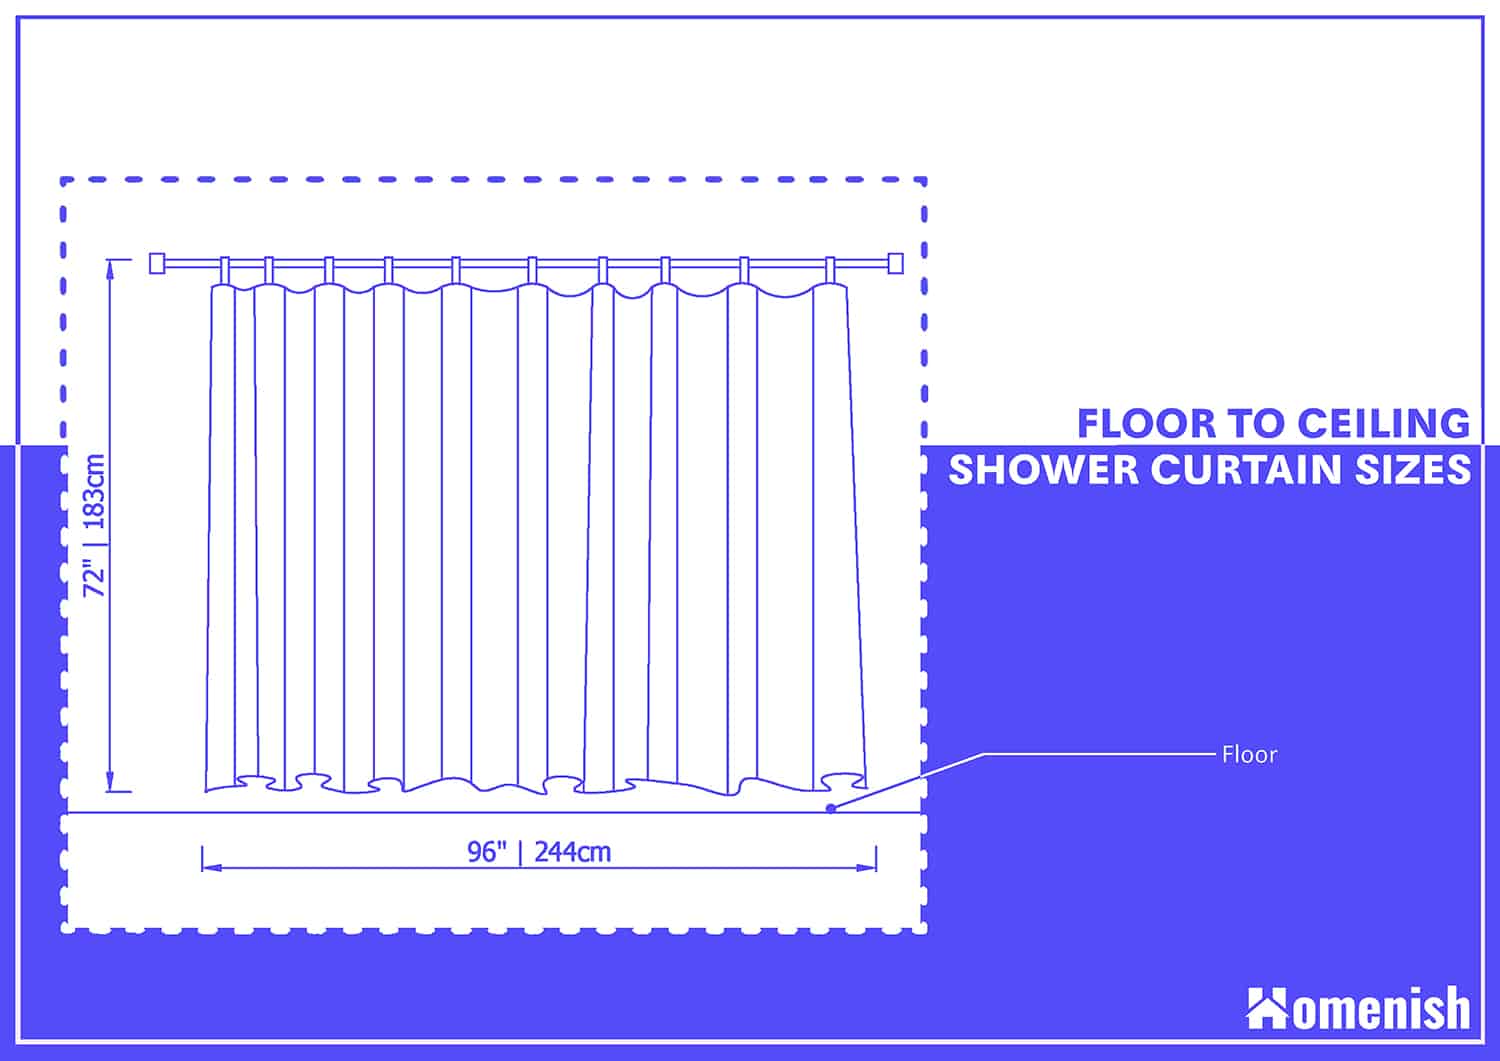 Floor to Ceiling Shower Curtain Size